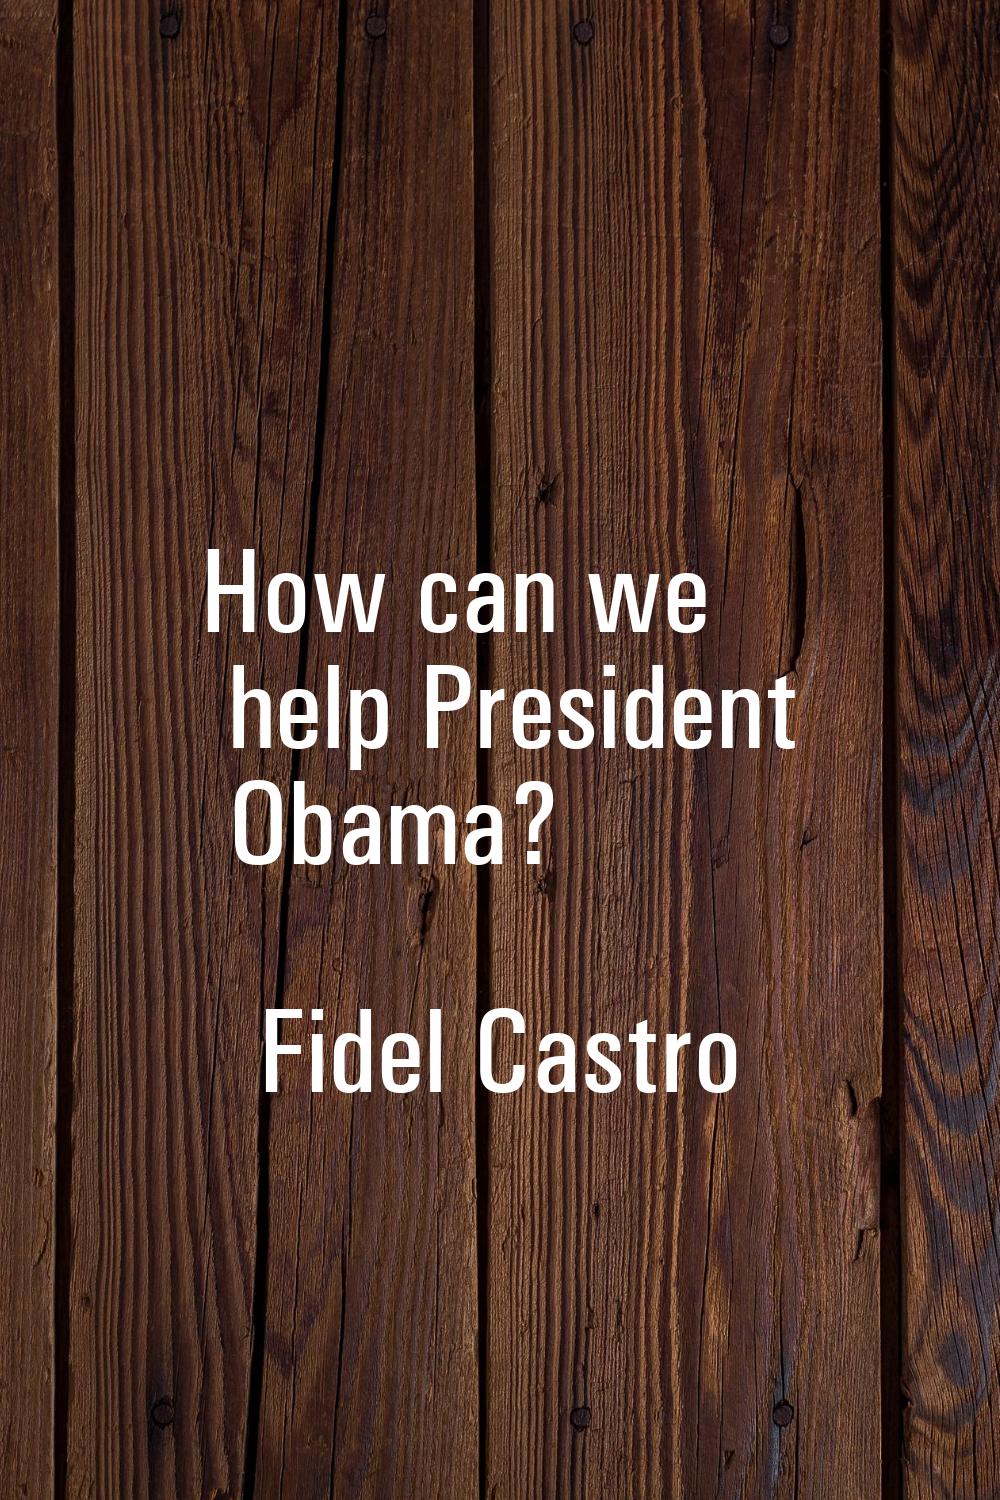 How can we help President Obama?